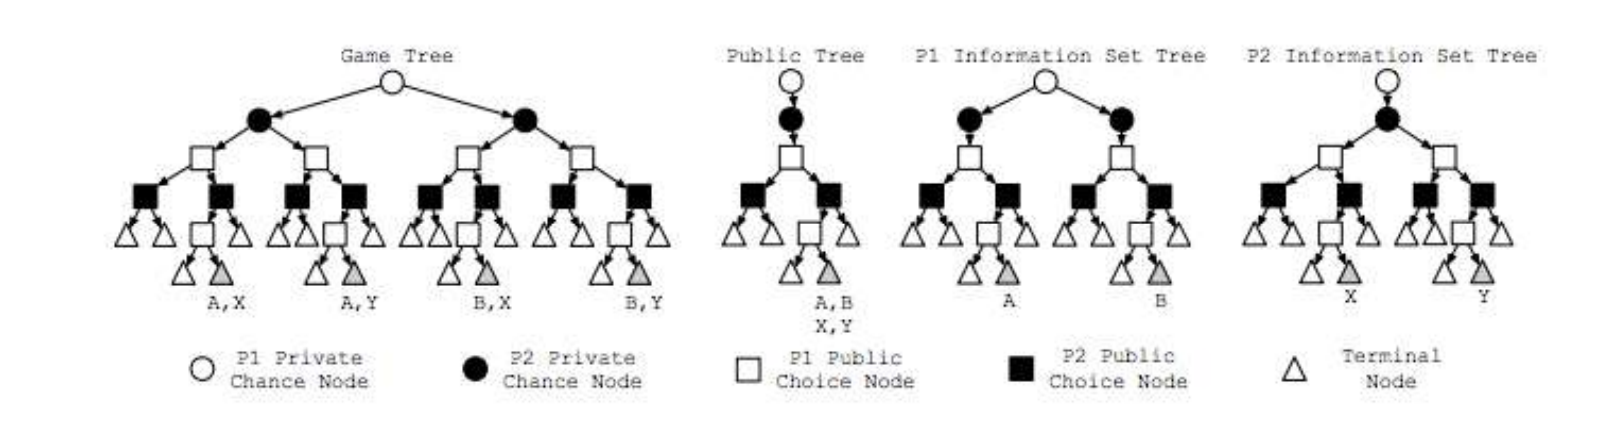 Kuhn Poker Tree from different perspectives